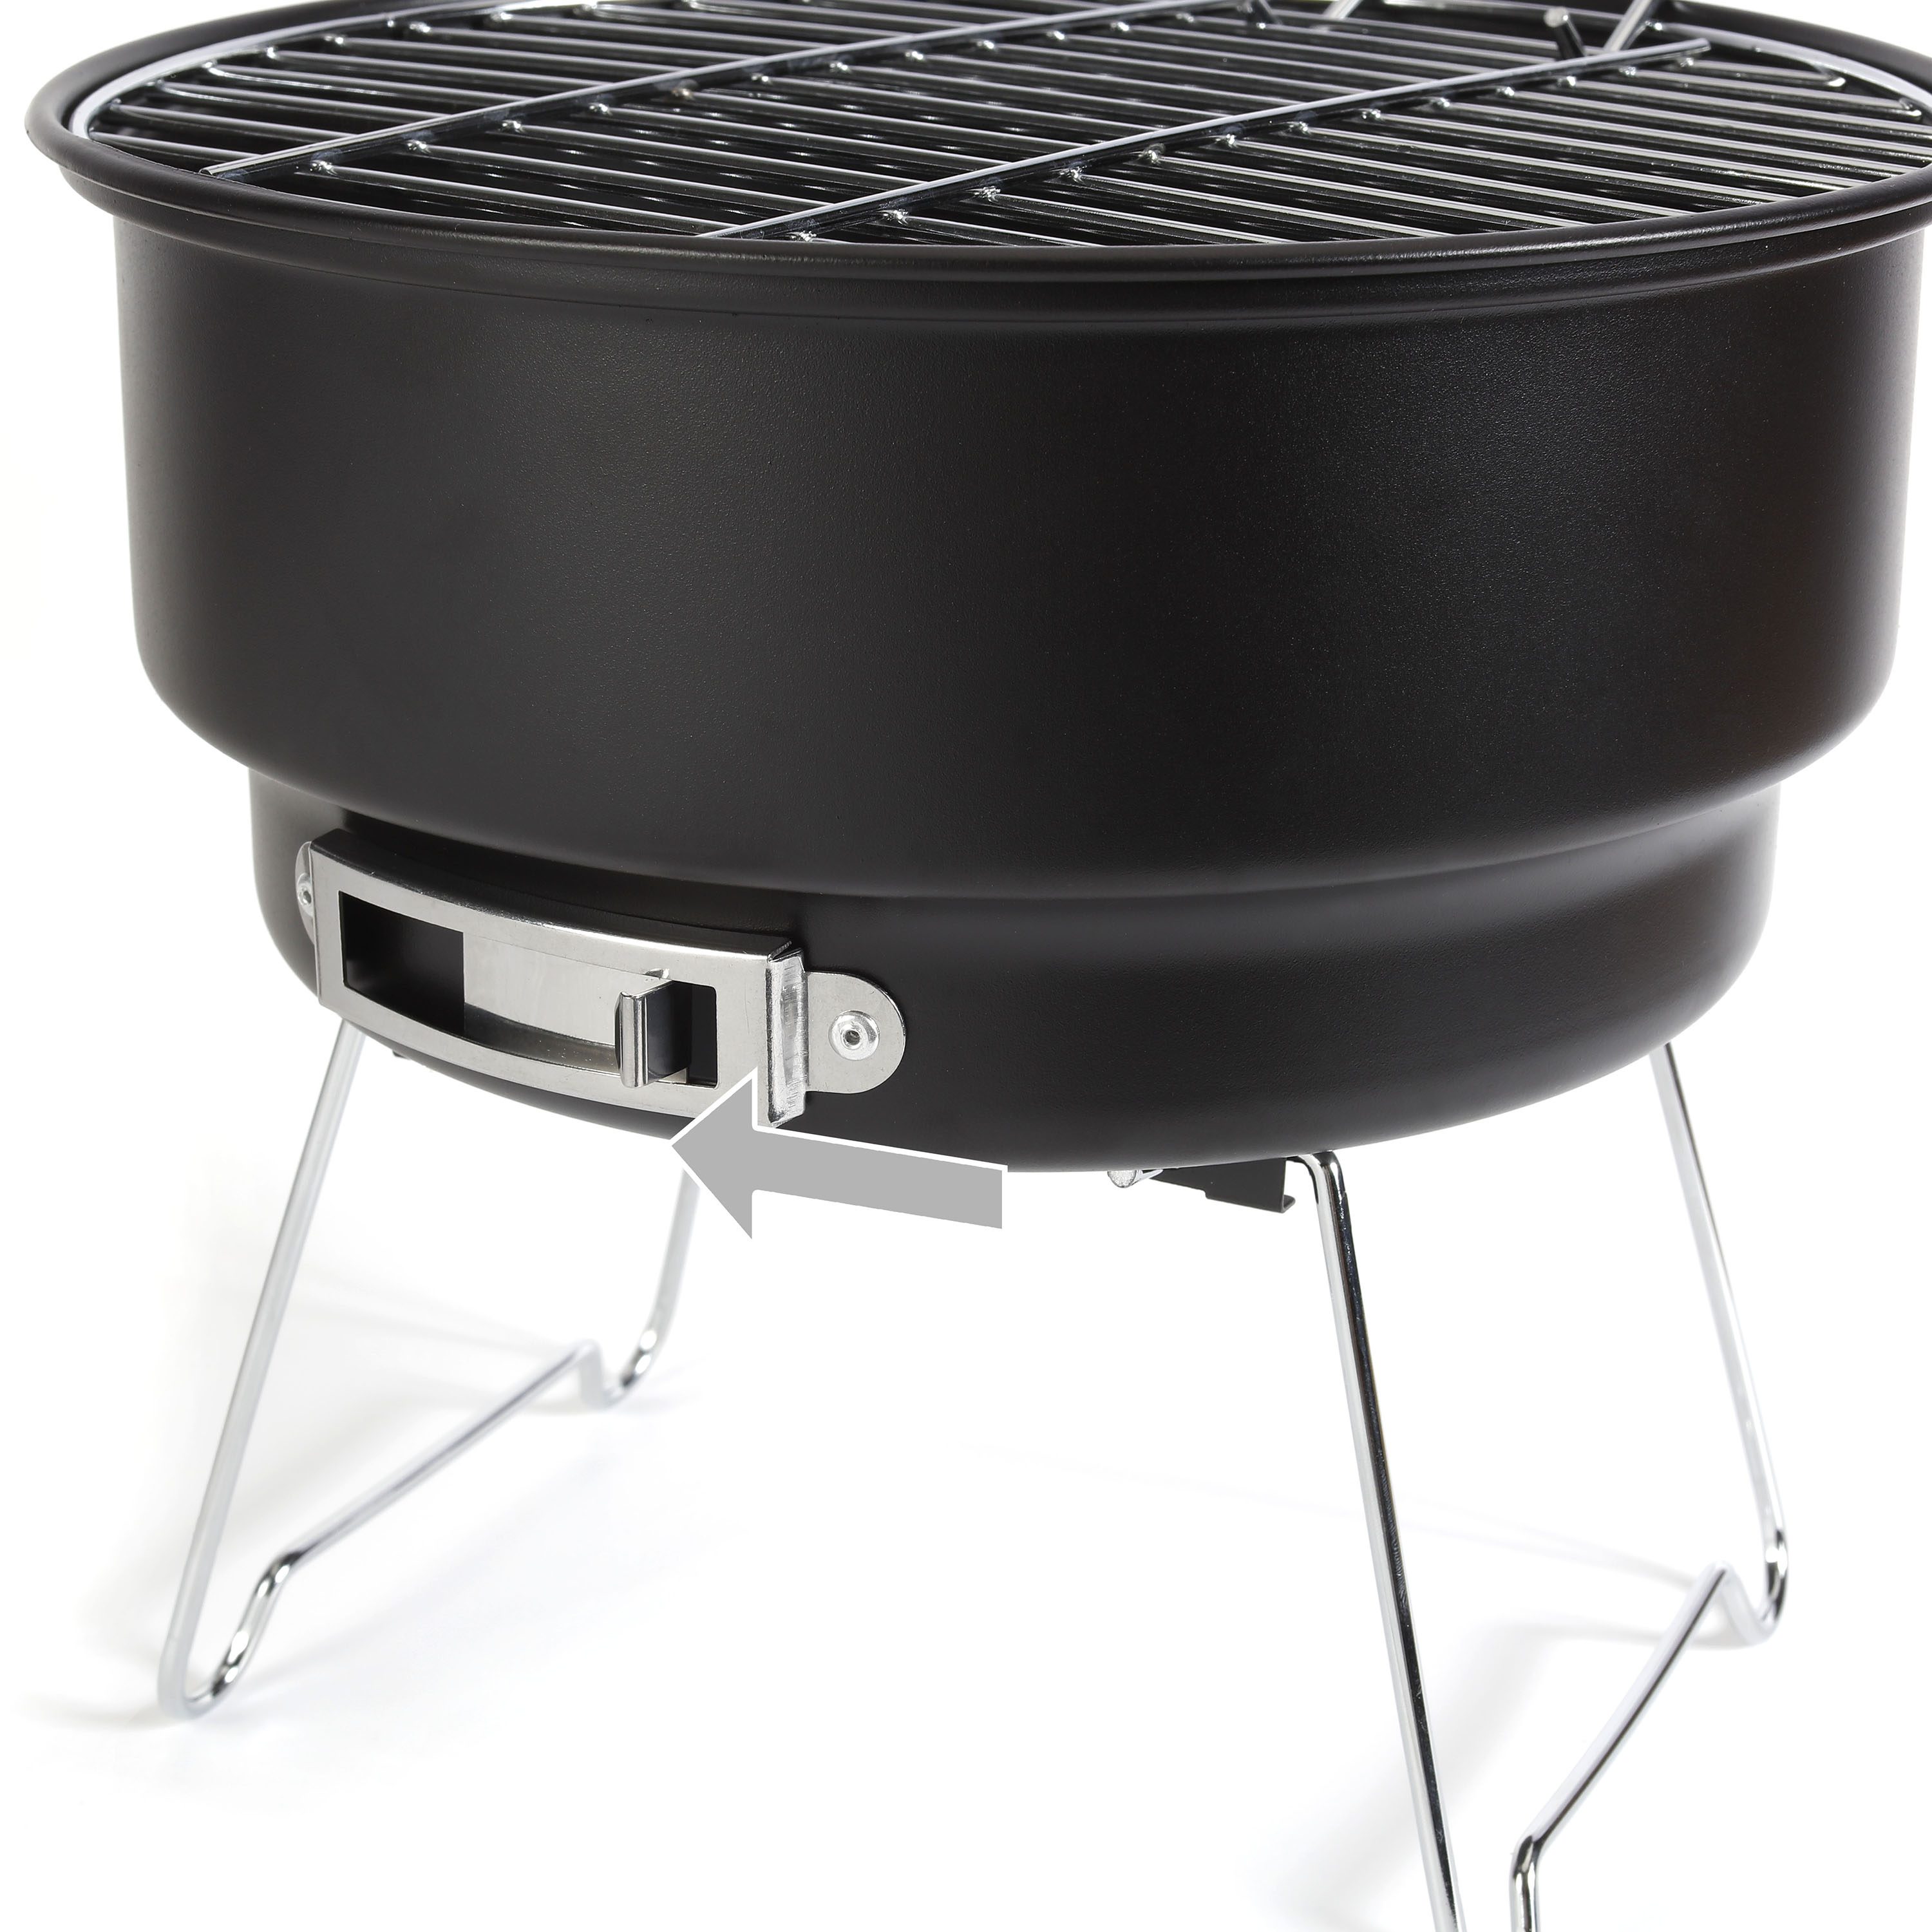 Ozark Trail Brand 10" Portable Camping Charcoal Grill with Cooler Bag, Black, Nylon - image 5 of 8